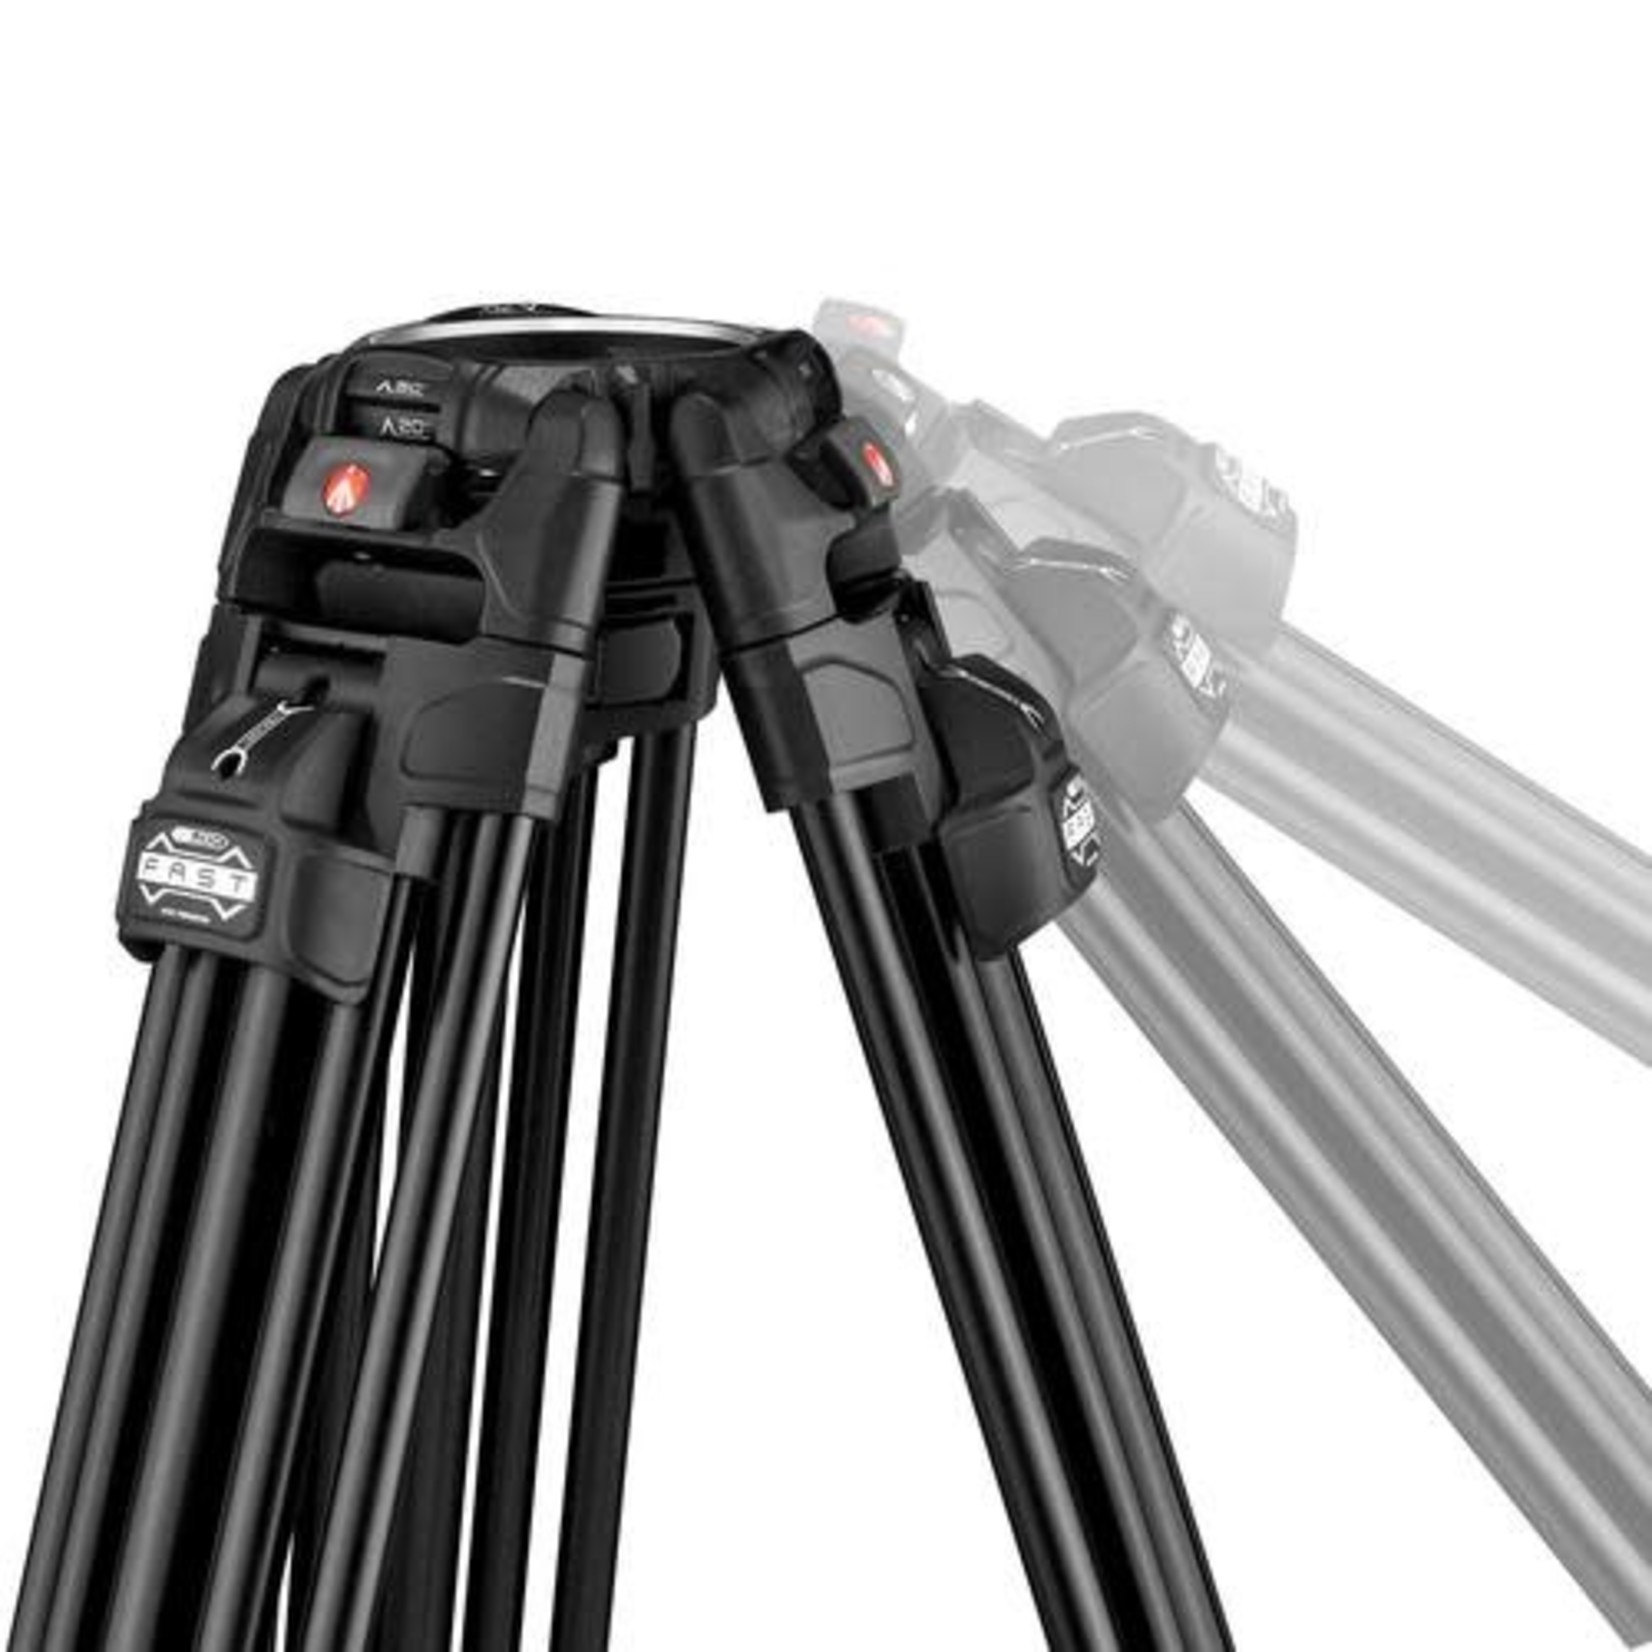 Manfrotto Manfrotto 504X Fluid Video Head & 645 FAST Aluminum Tripod with Mid-Level Spreader